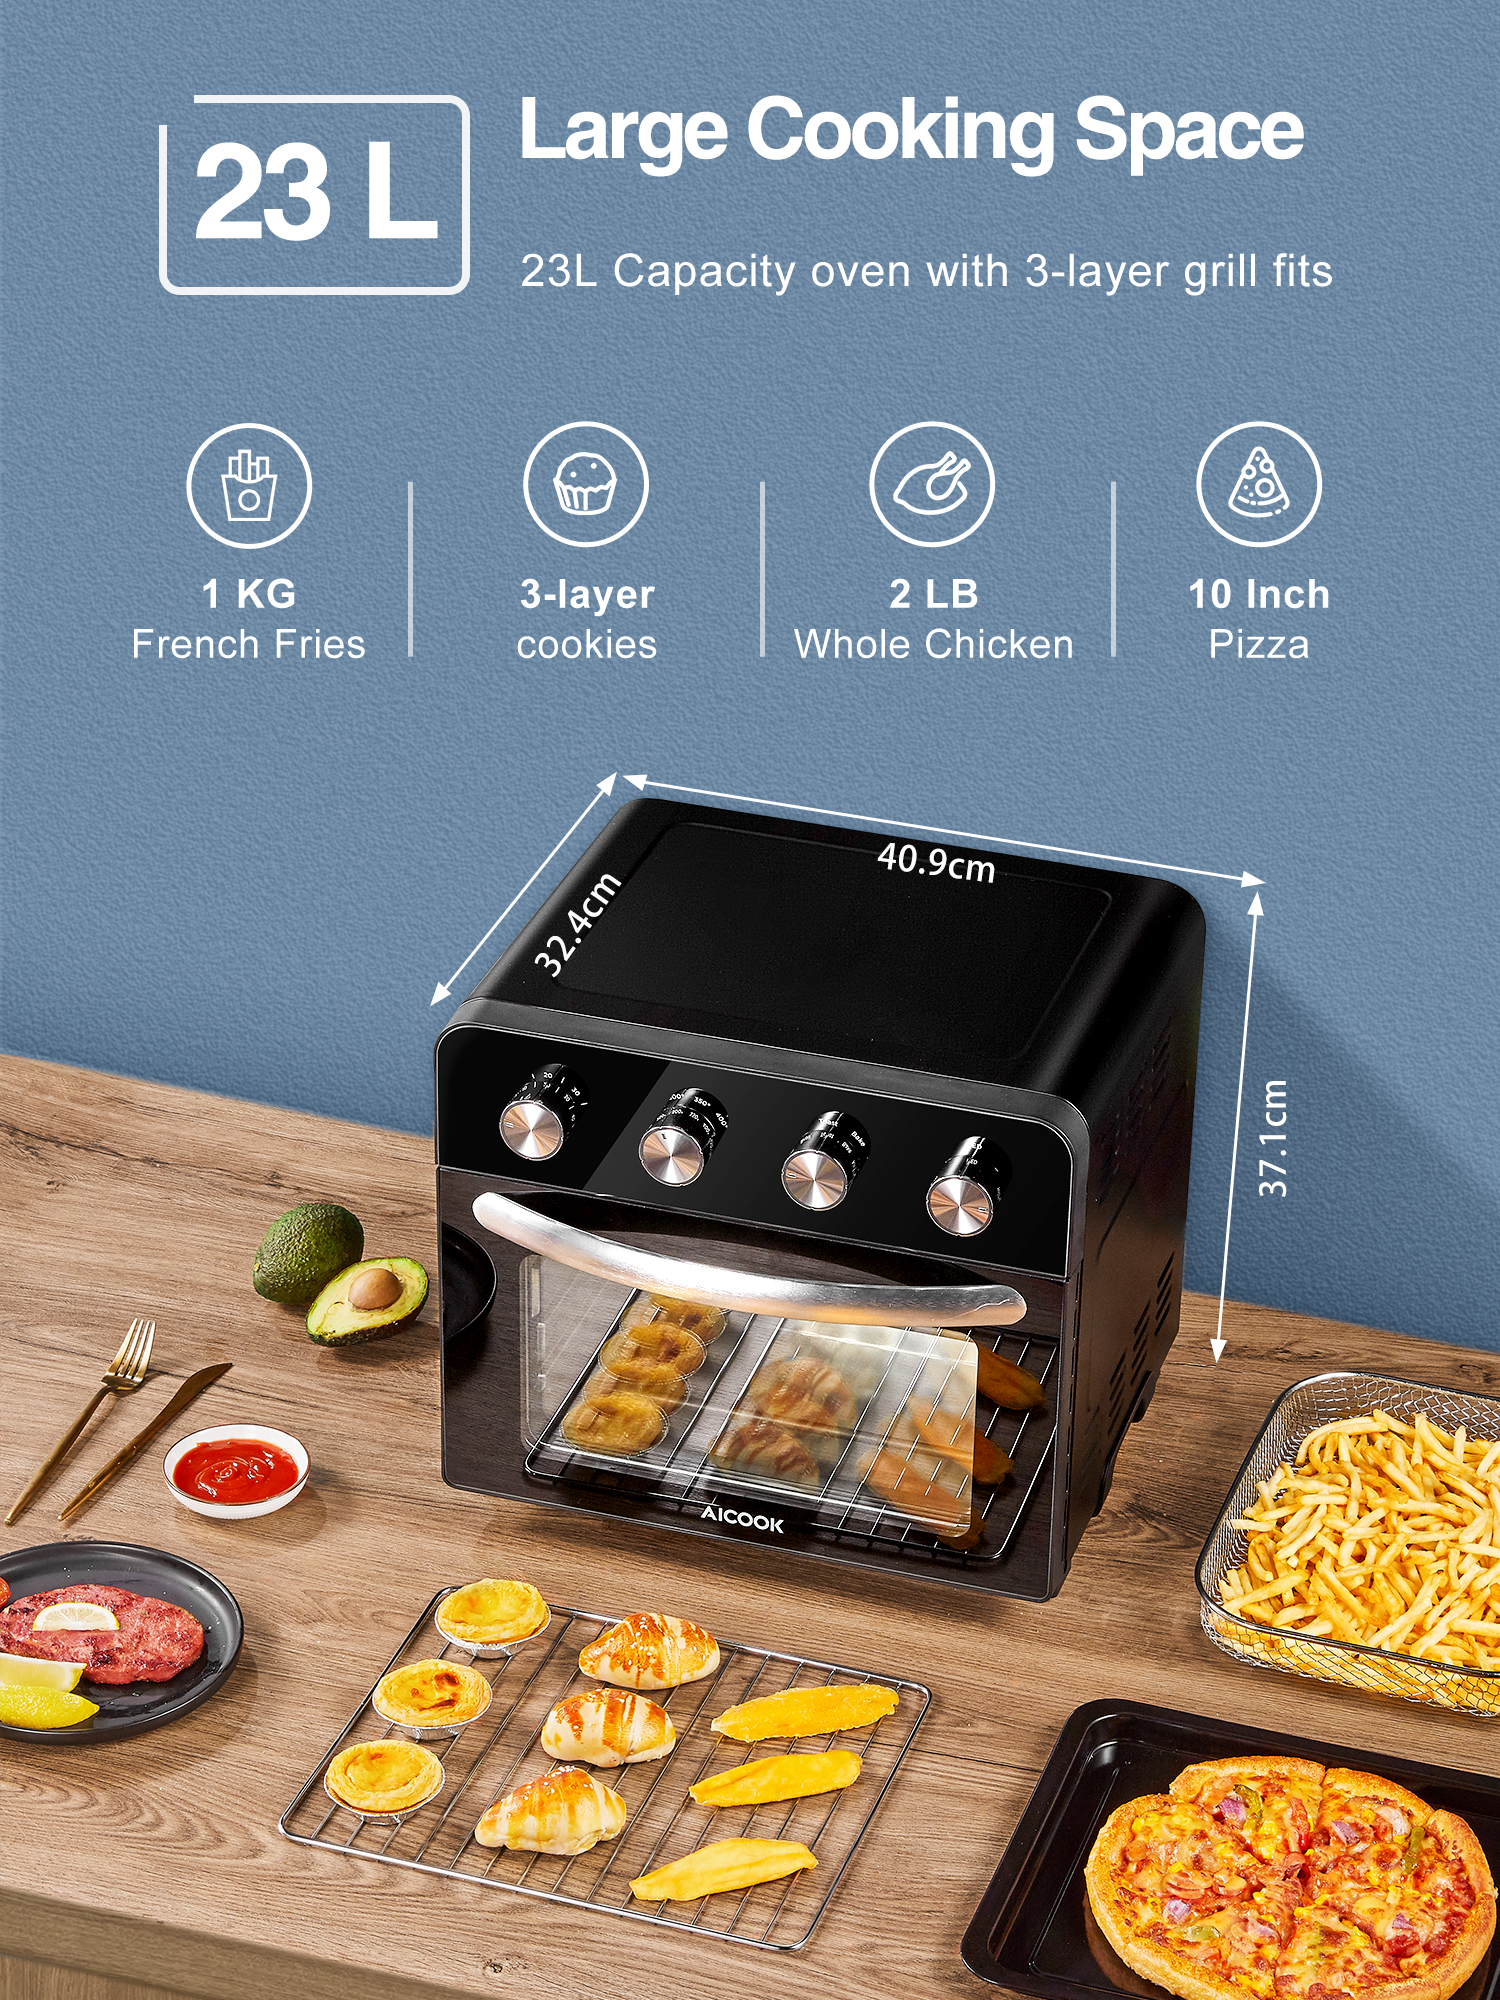 Nahomy Oil-Less Air Fryer Oven 24 Qt Toaster Oven 10-in-1 Air Fryer, 1700W, 6 Free Accessories & 75 Recipes, Black - image 2 of 7